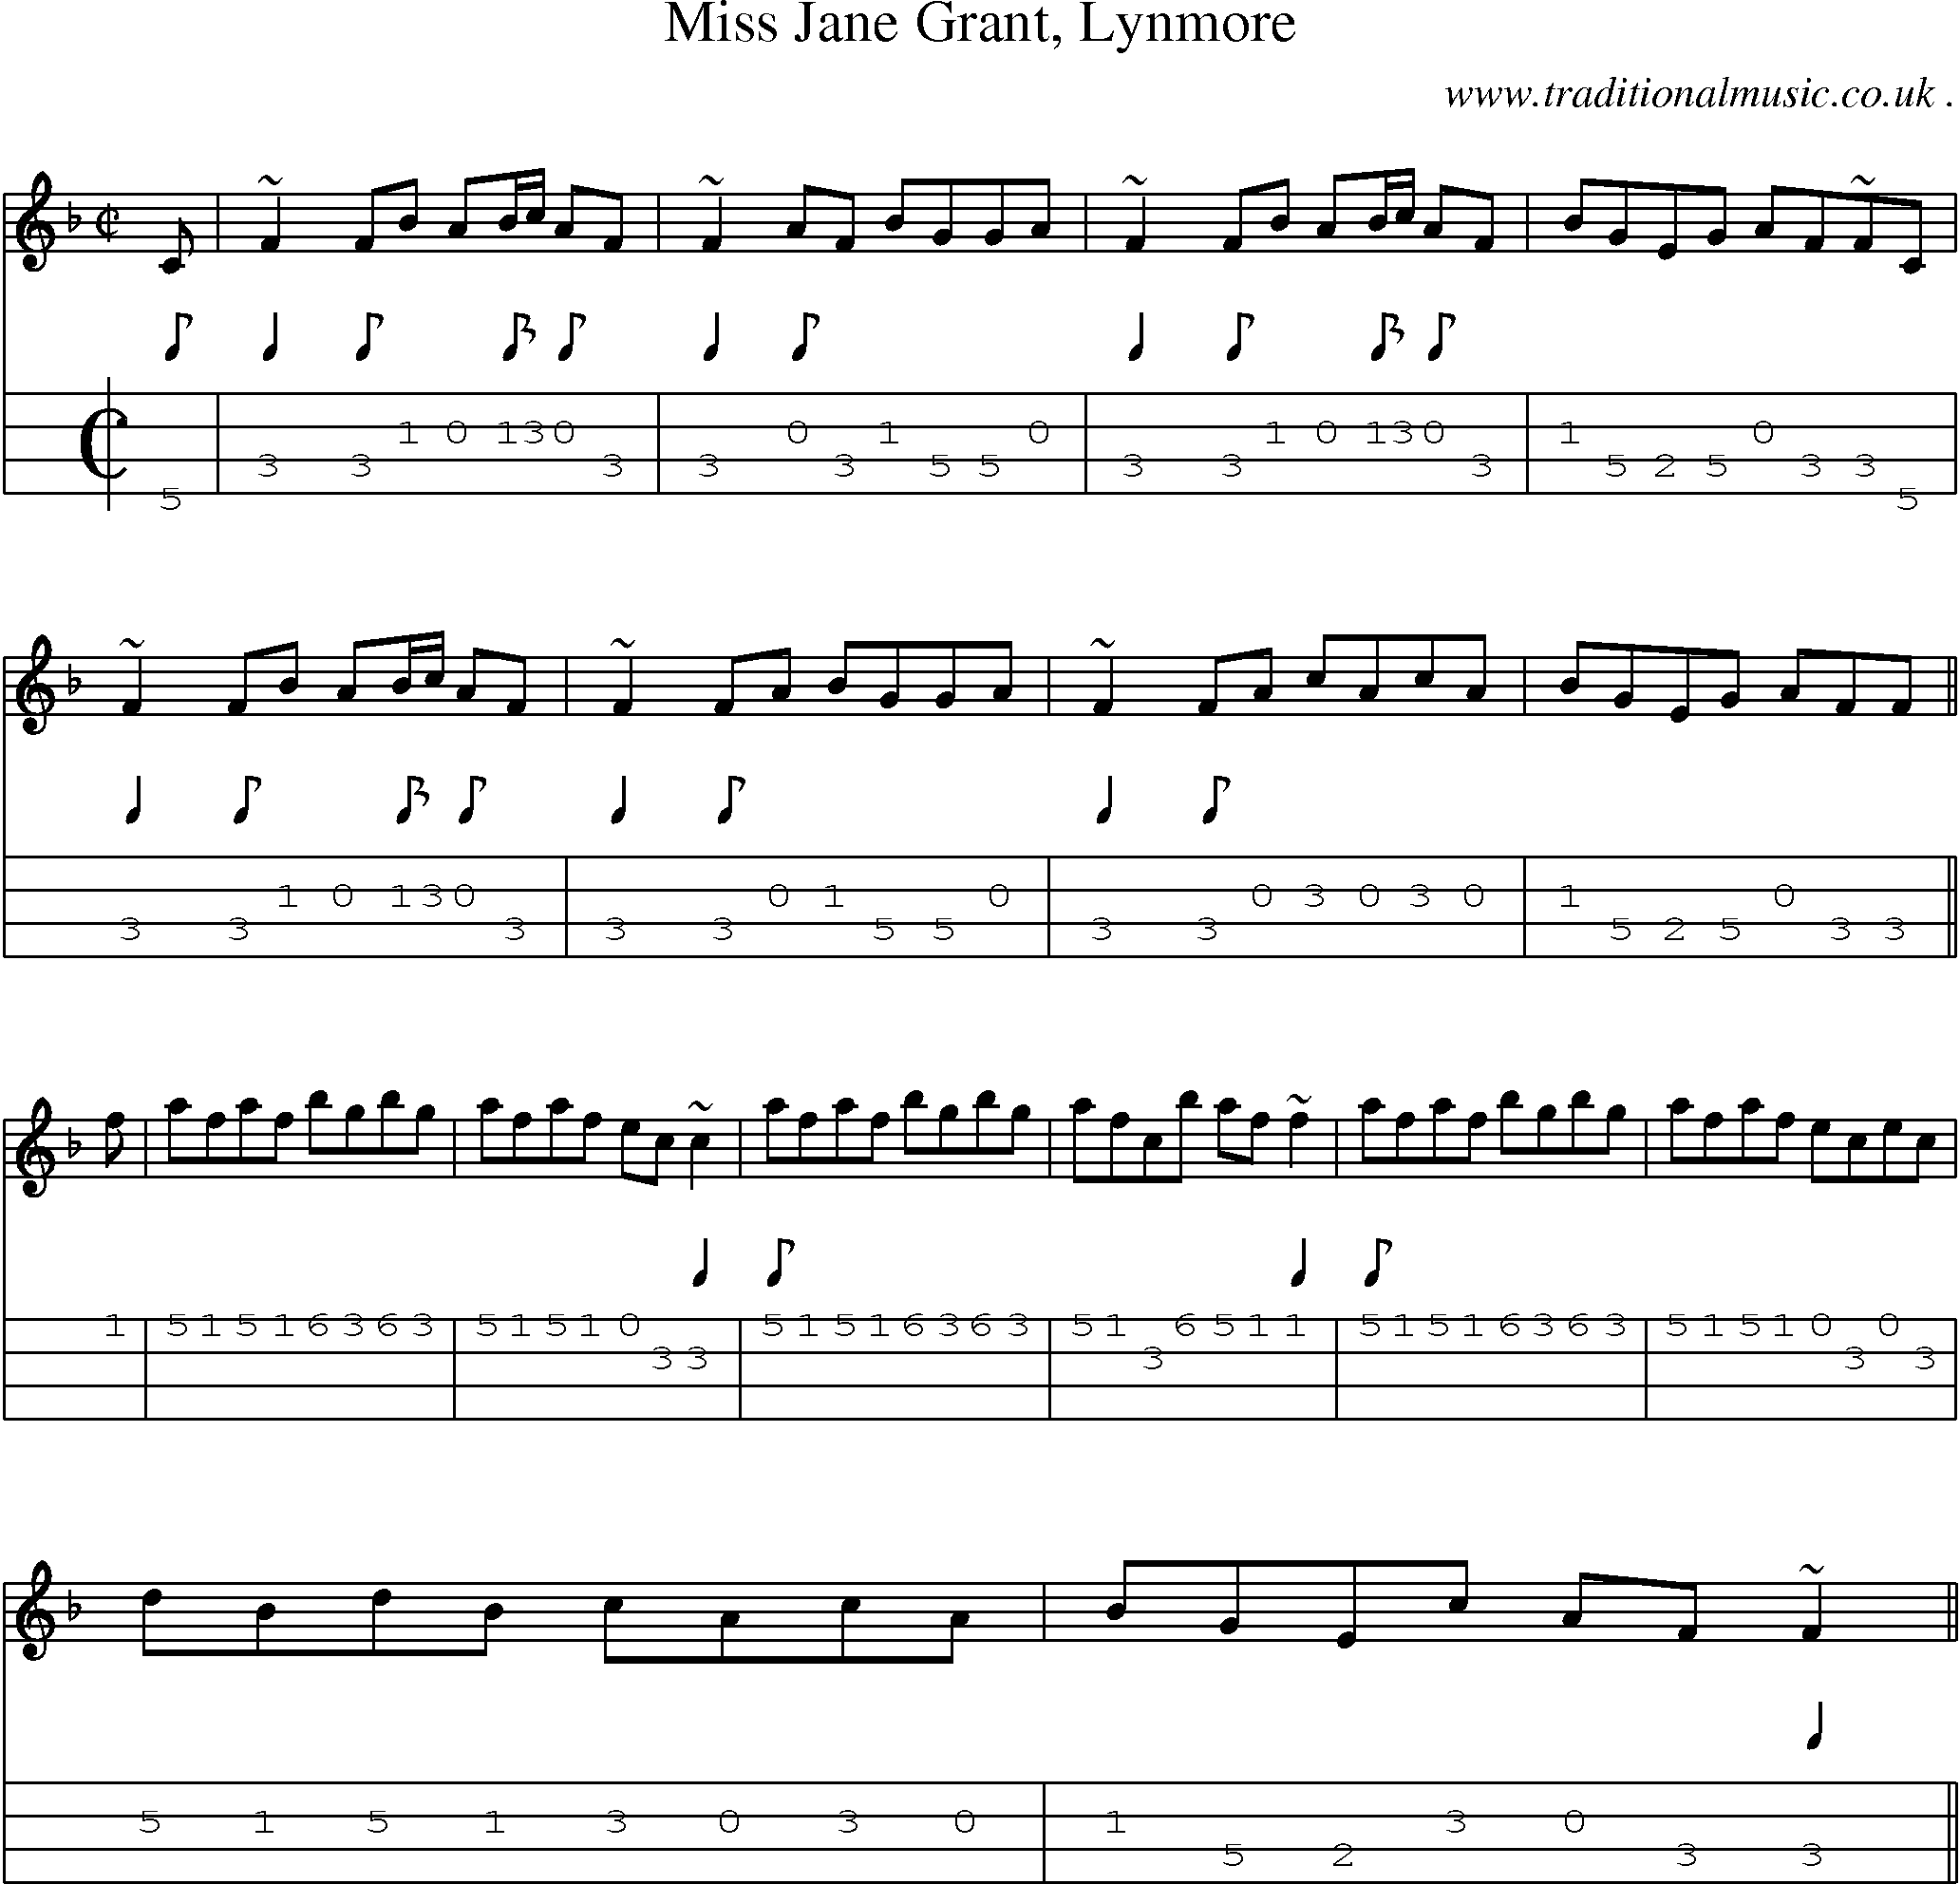 Sheet-music  score, Chords and Mandolin Tabs for Miss Jane Grant Lynmore